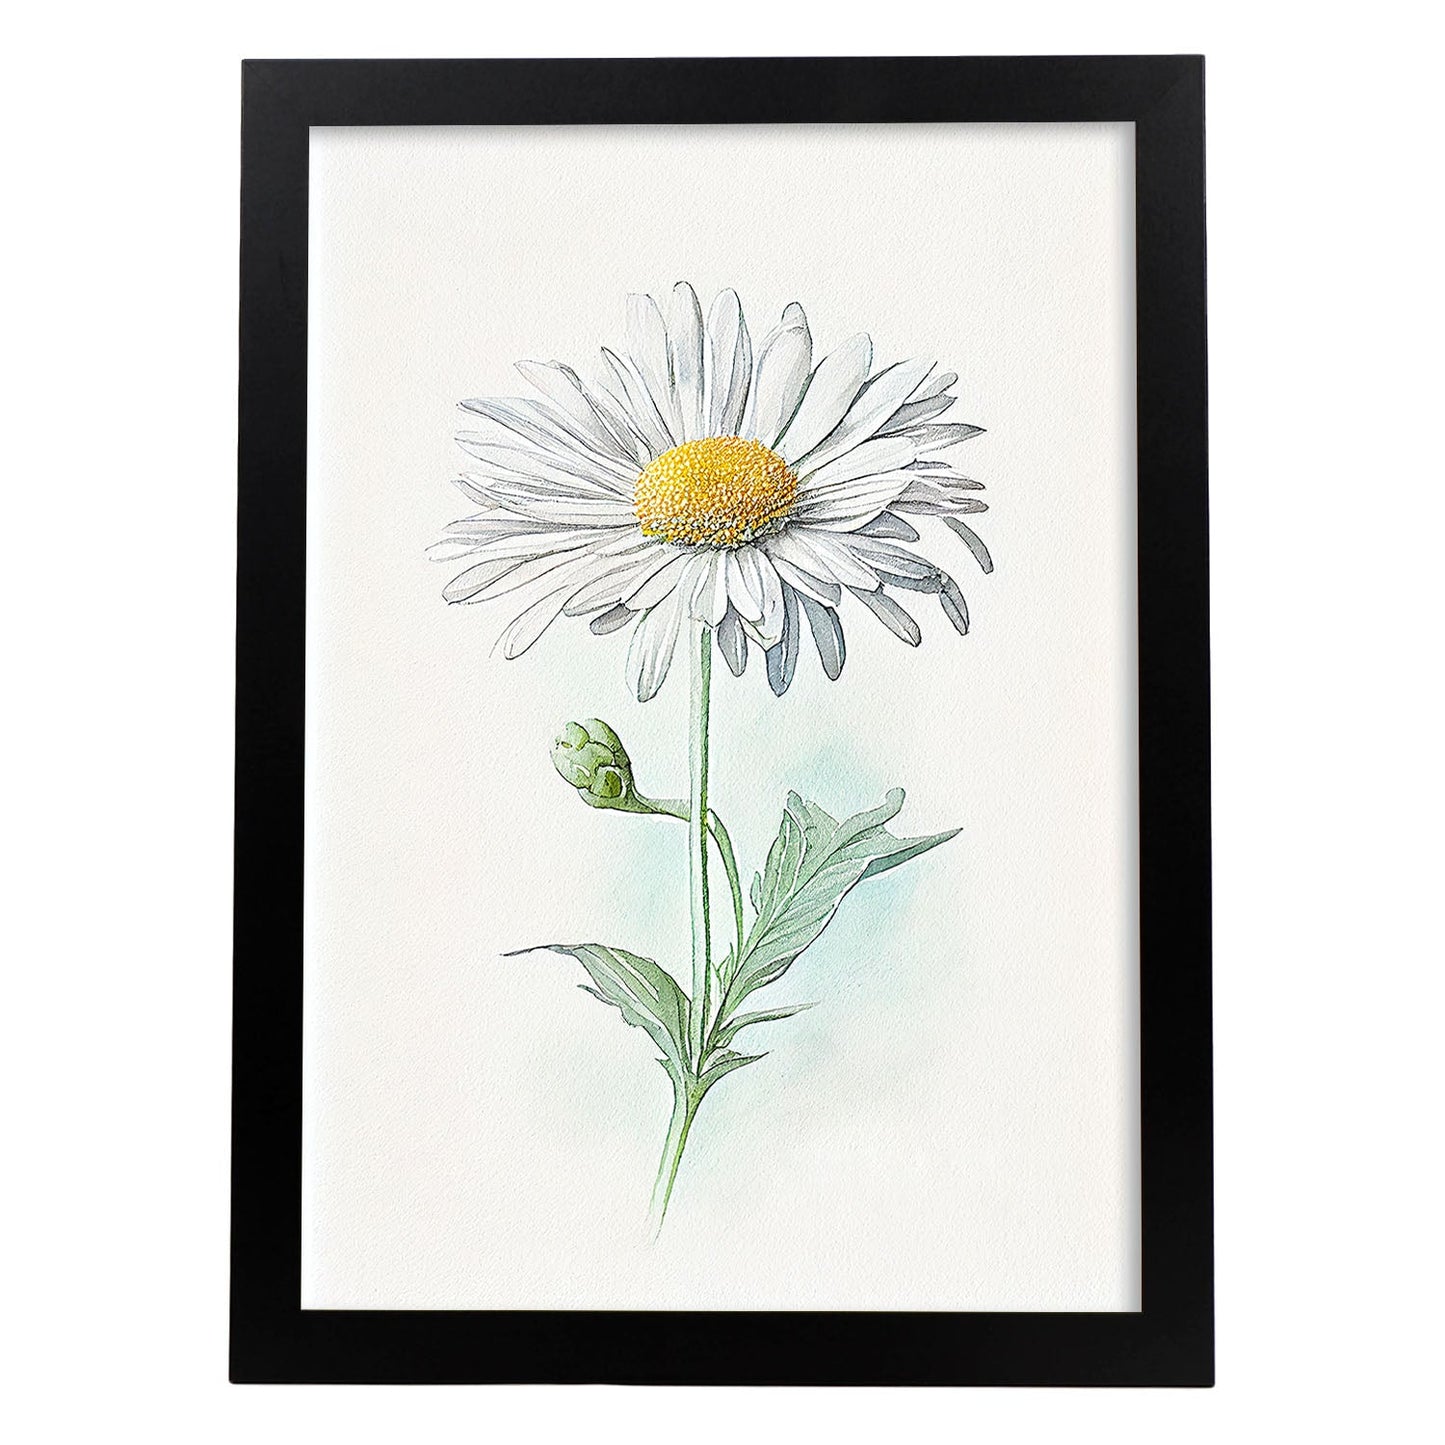 Nacnic watercolor minmal Shasta Daisy_2. Aesthetic Wall Art Prints for Bedroom or Living Room Design.